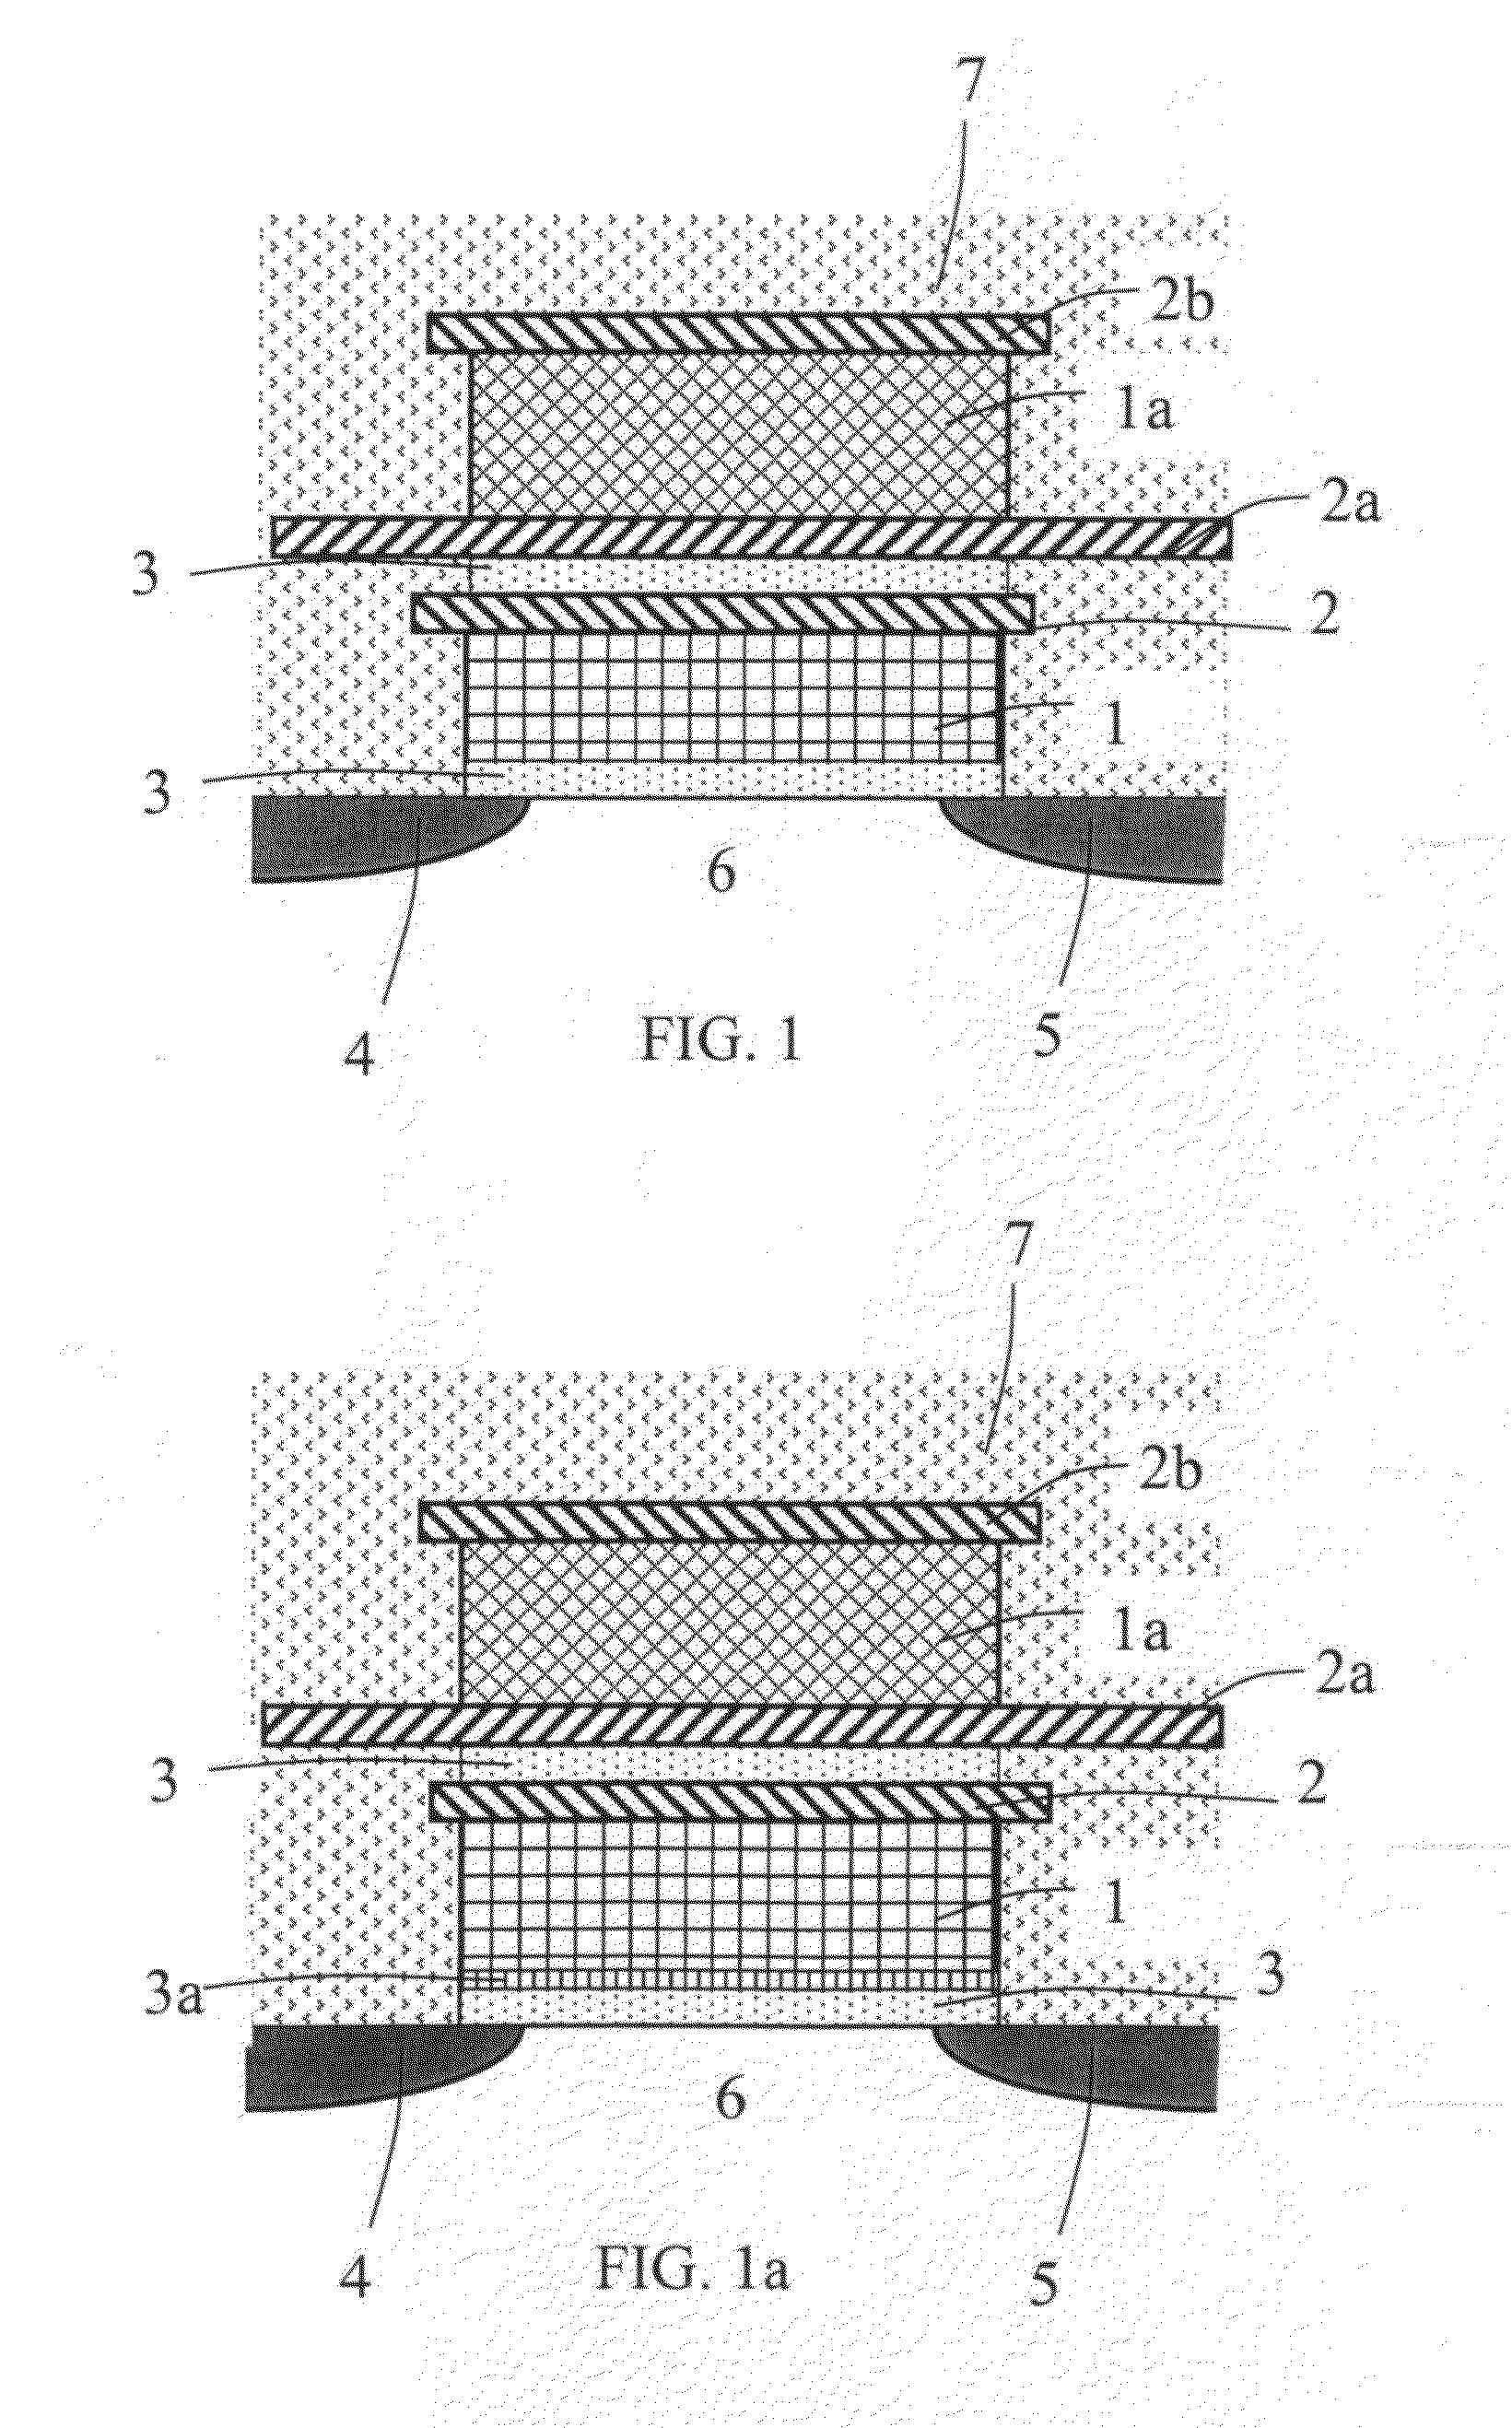 Nondestructive methods of reading information in ferroelectric memory elements